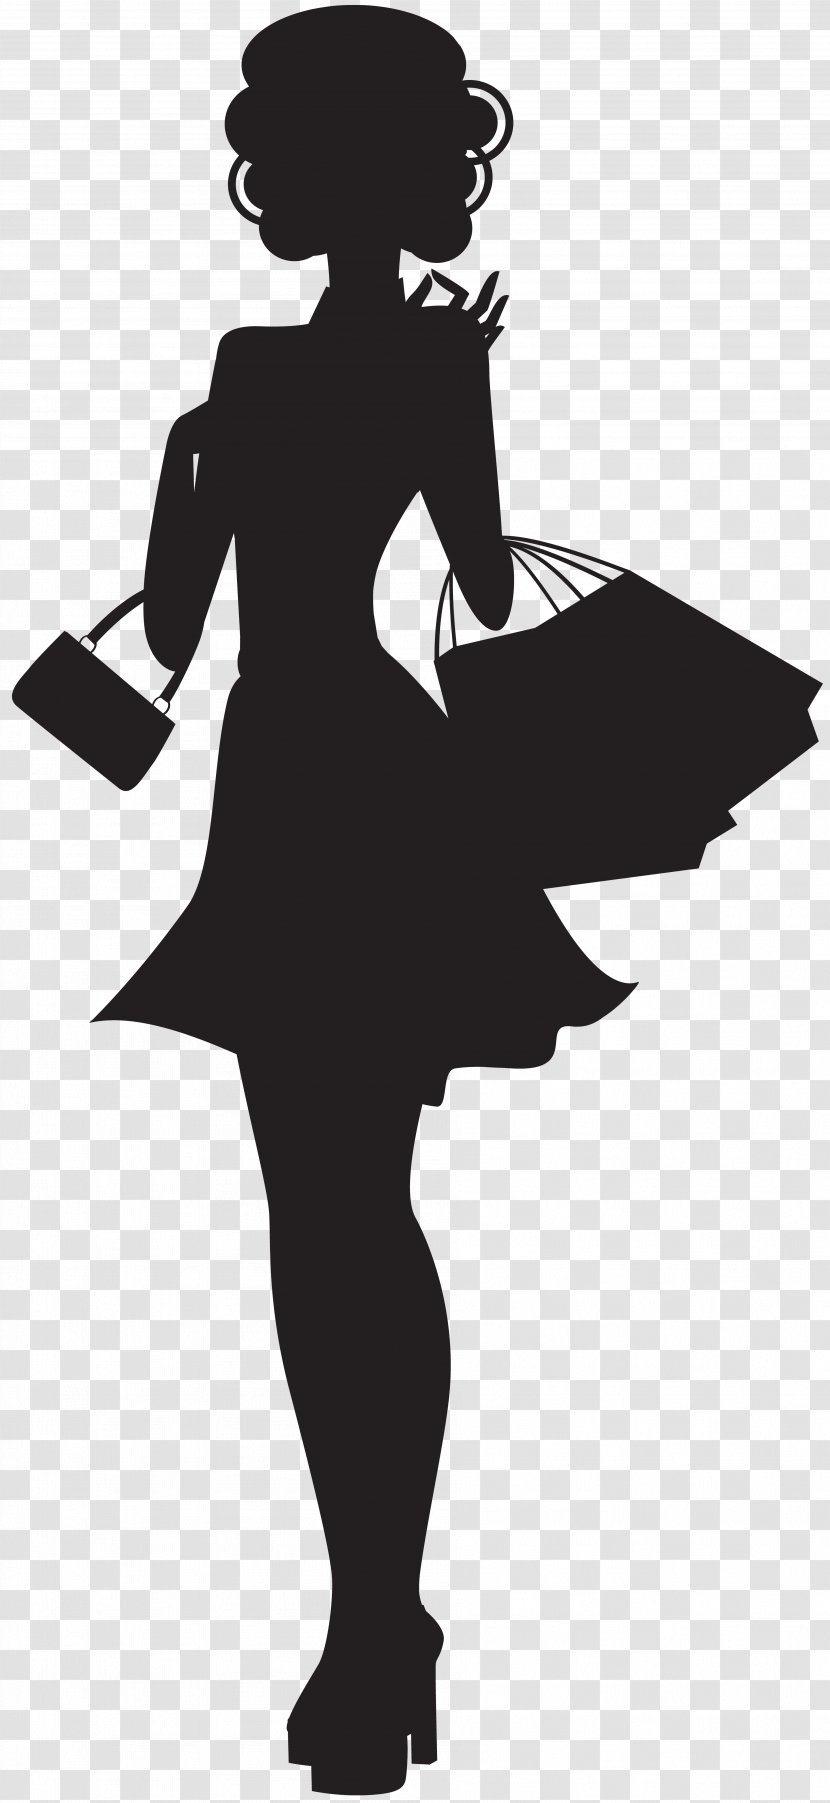 Woman Drawing Silhouette Clip Art - Shoe - Thinking Transparent PNG